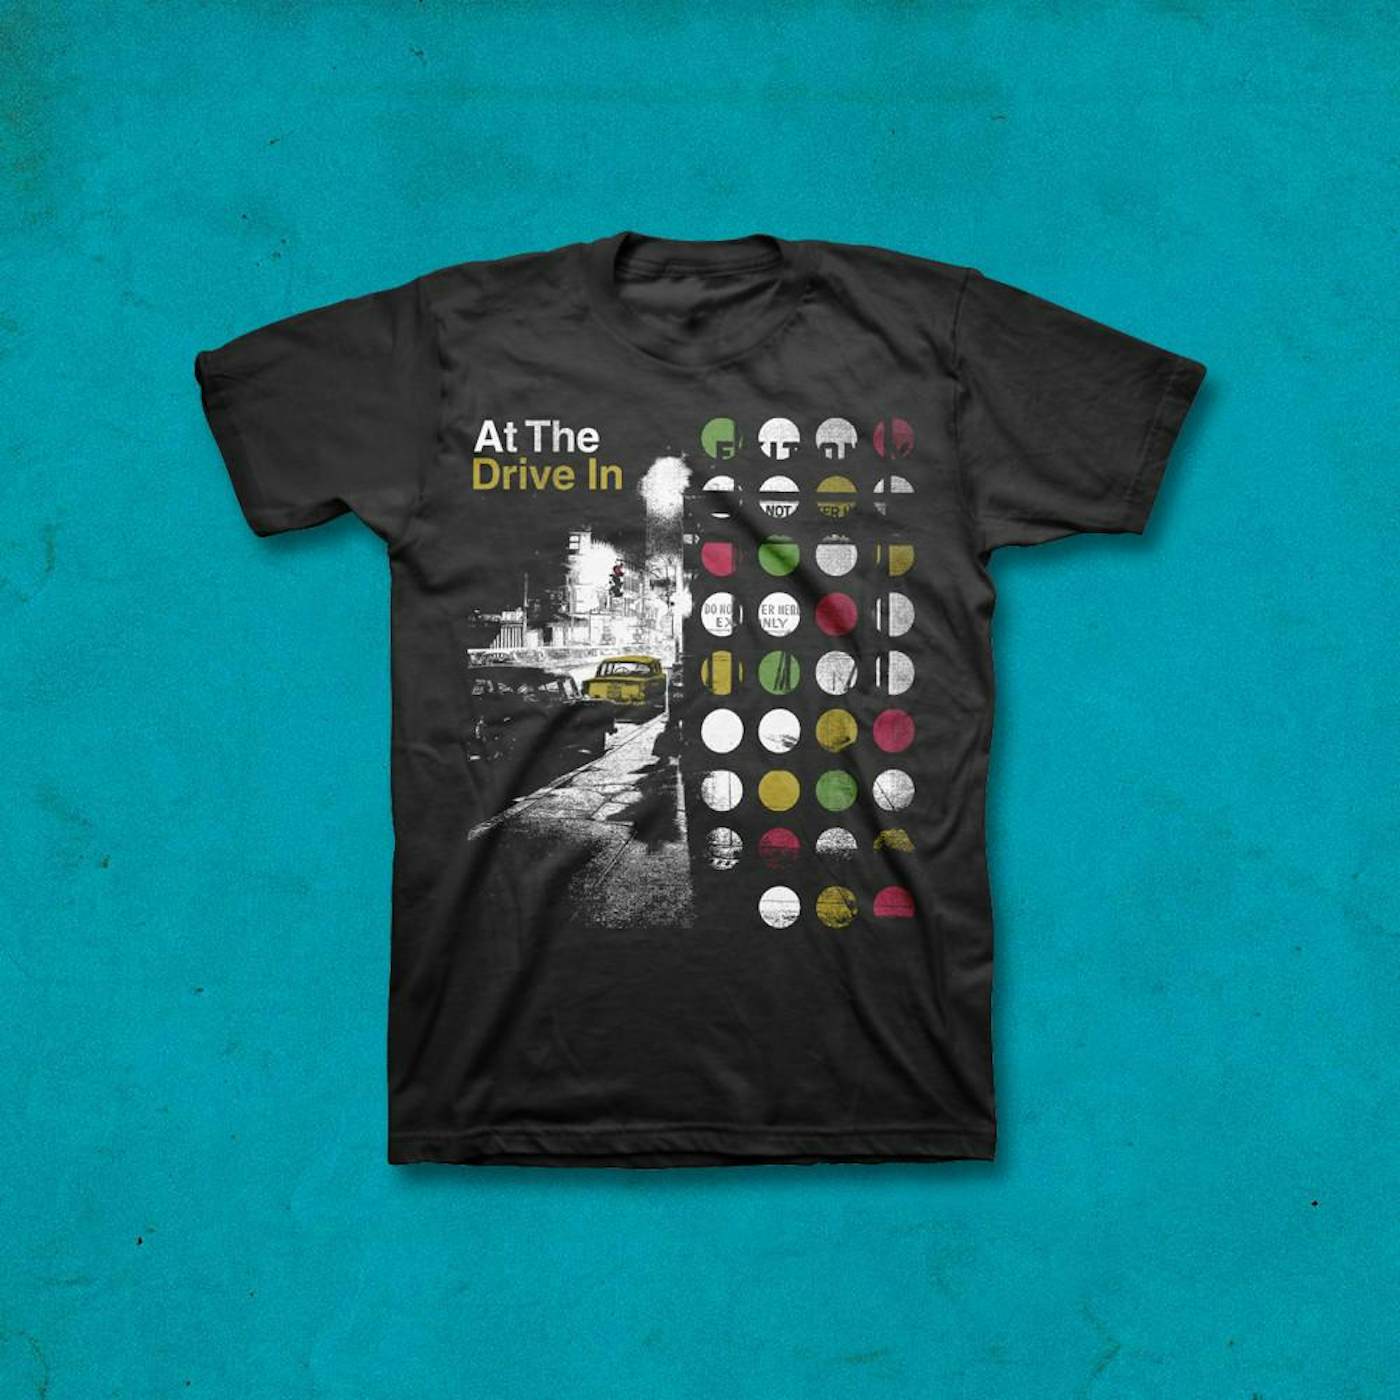 At the Drive-In Street T-shirt